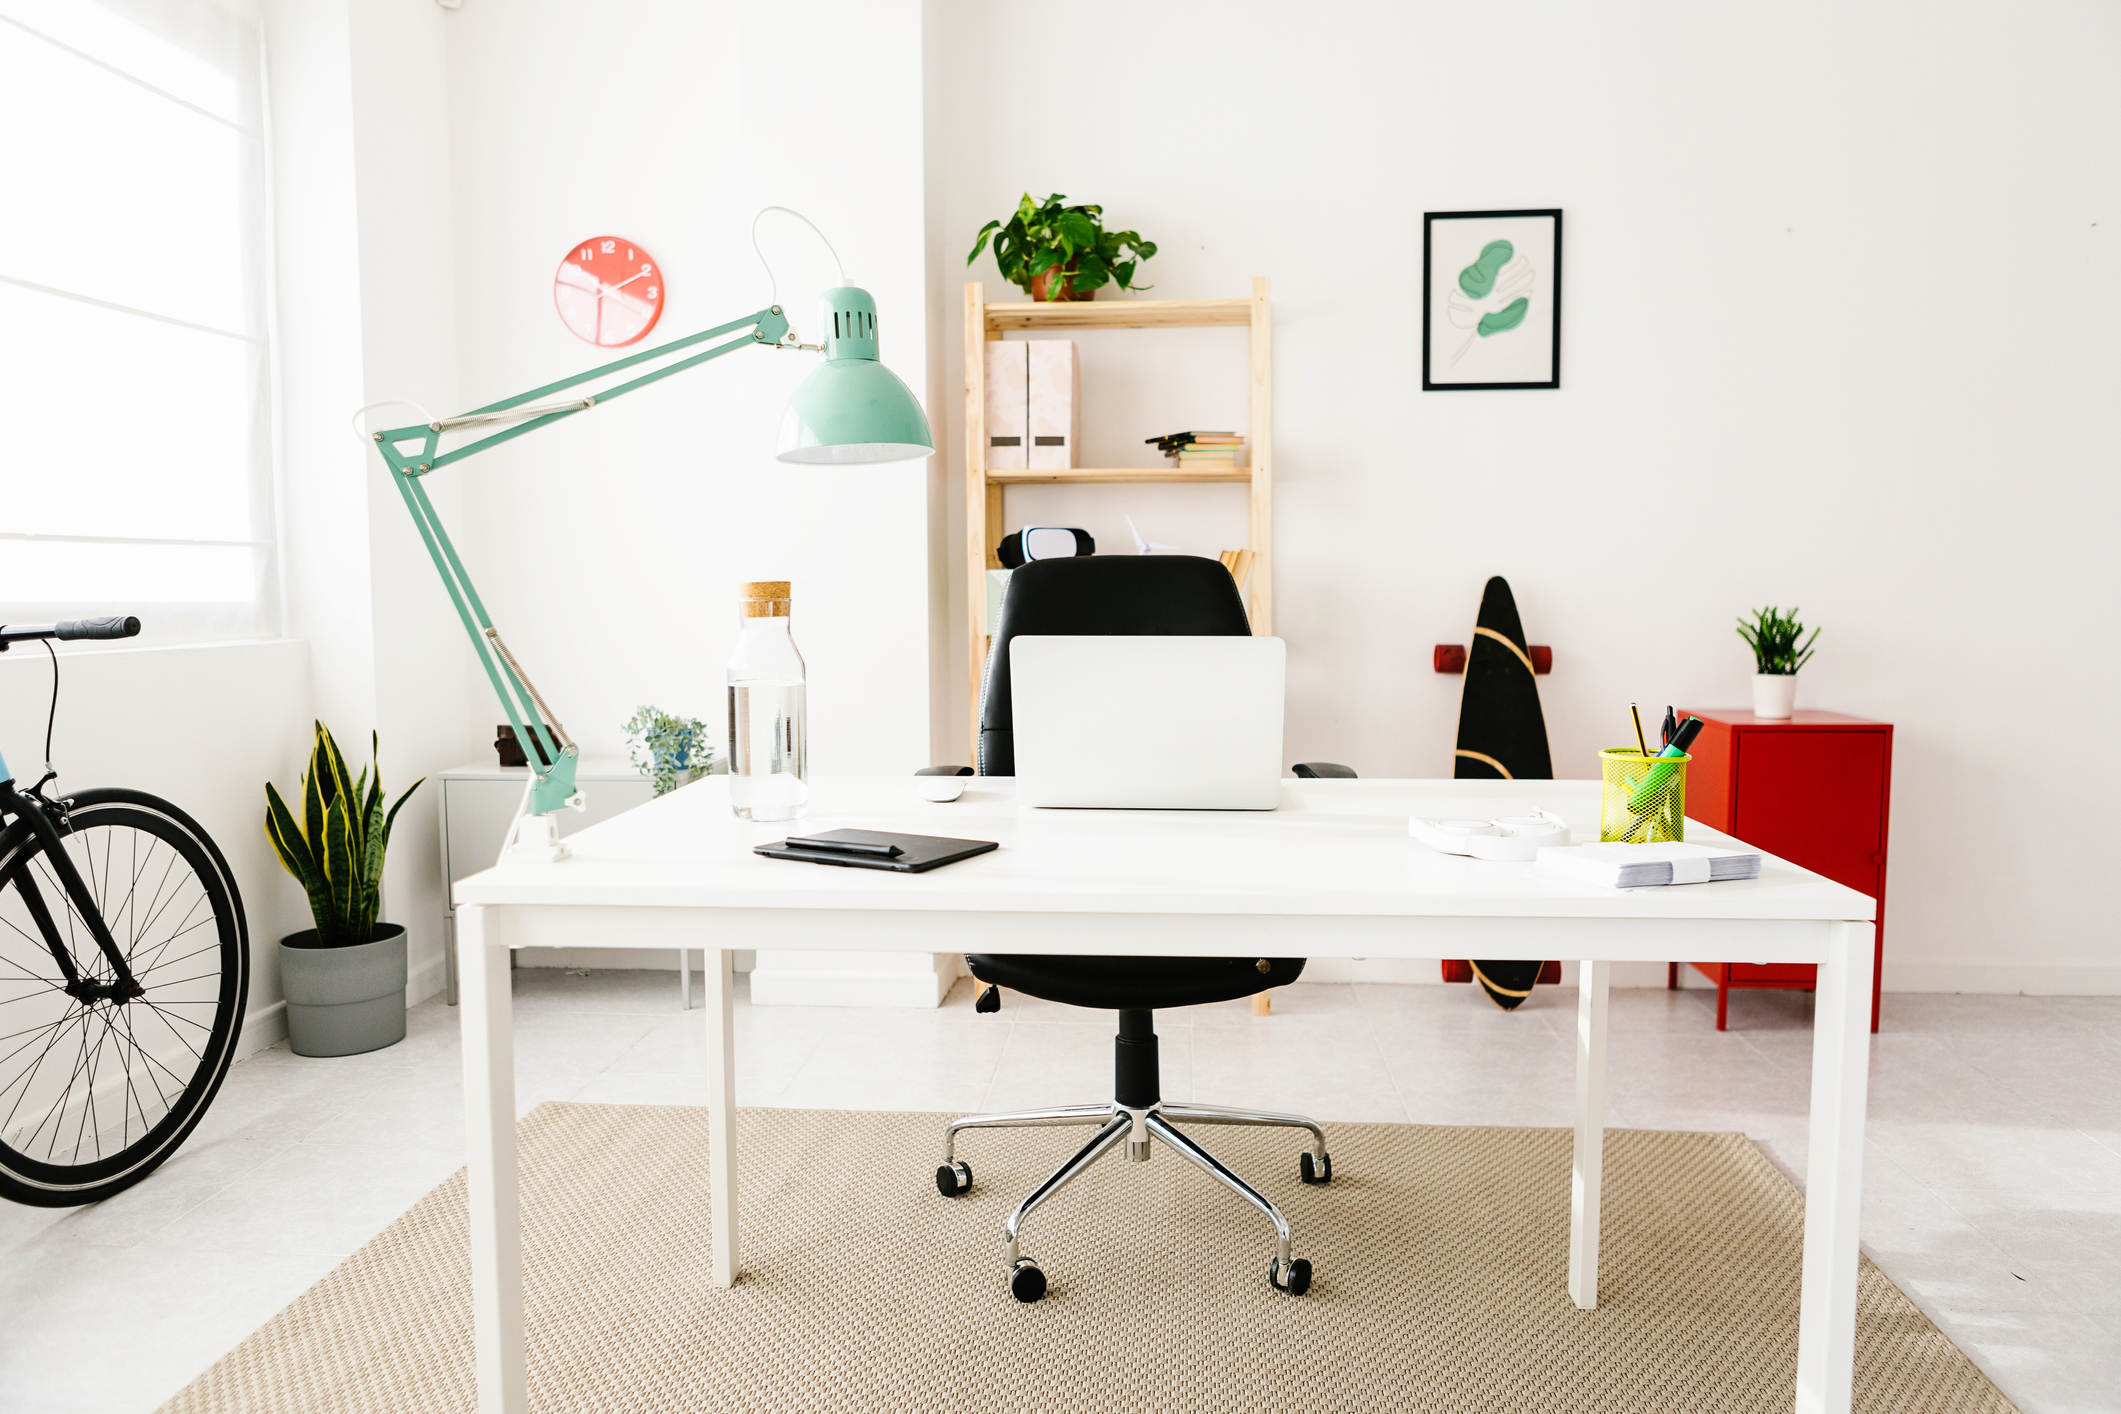 7 Home Office Essentials to Make Working From Home Easier